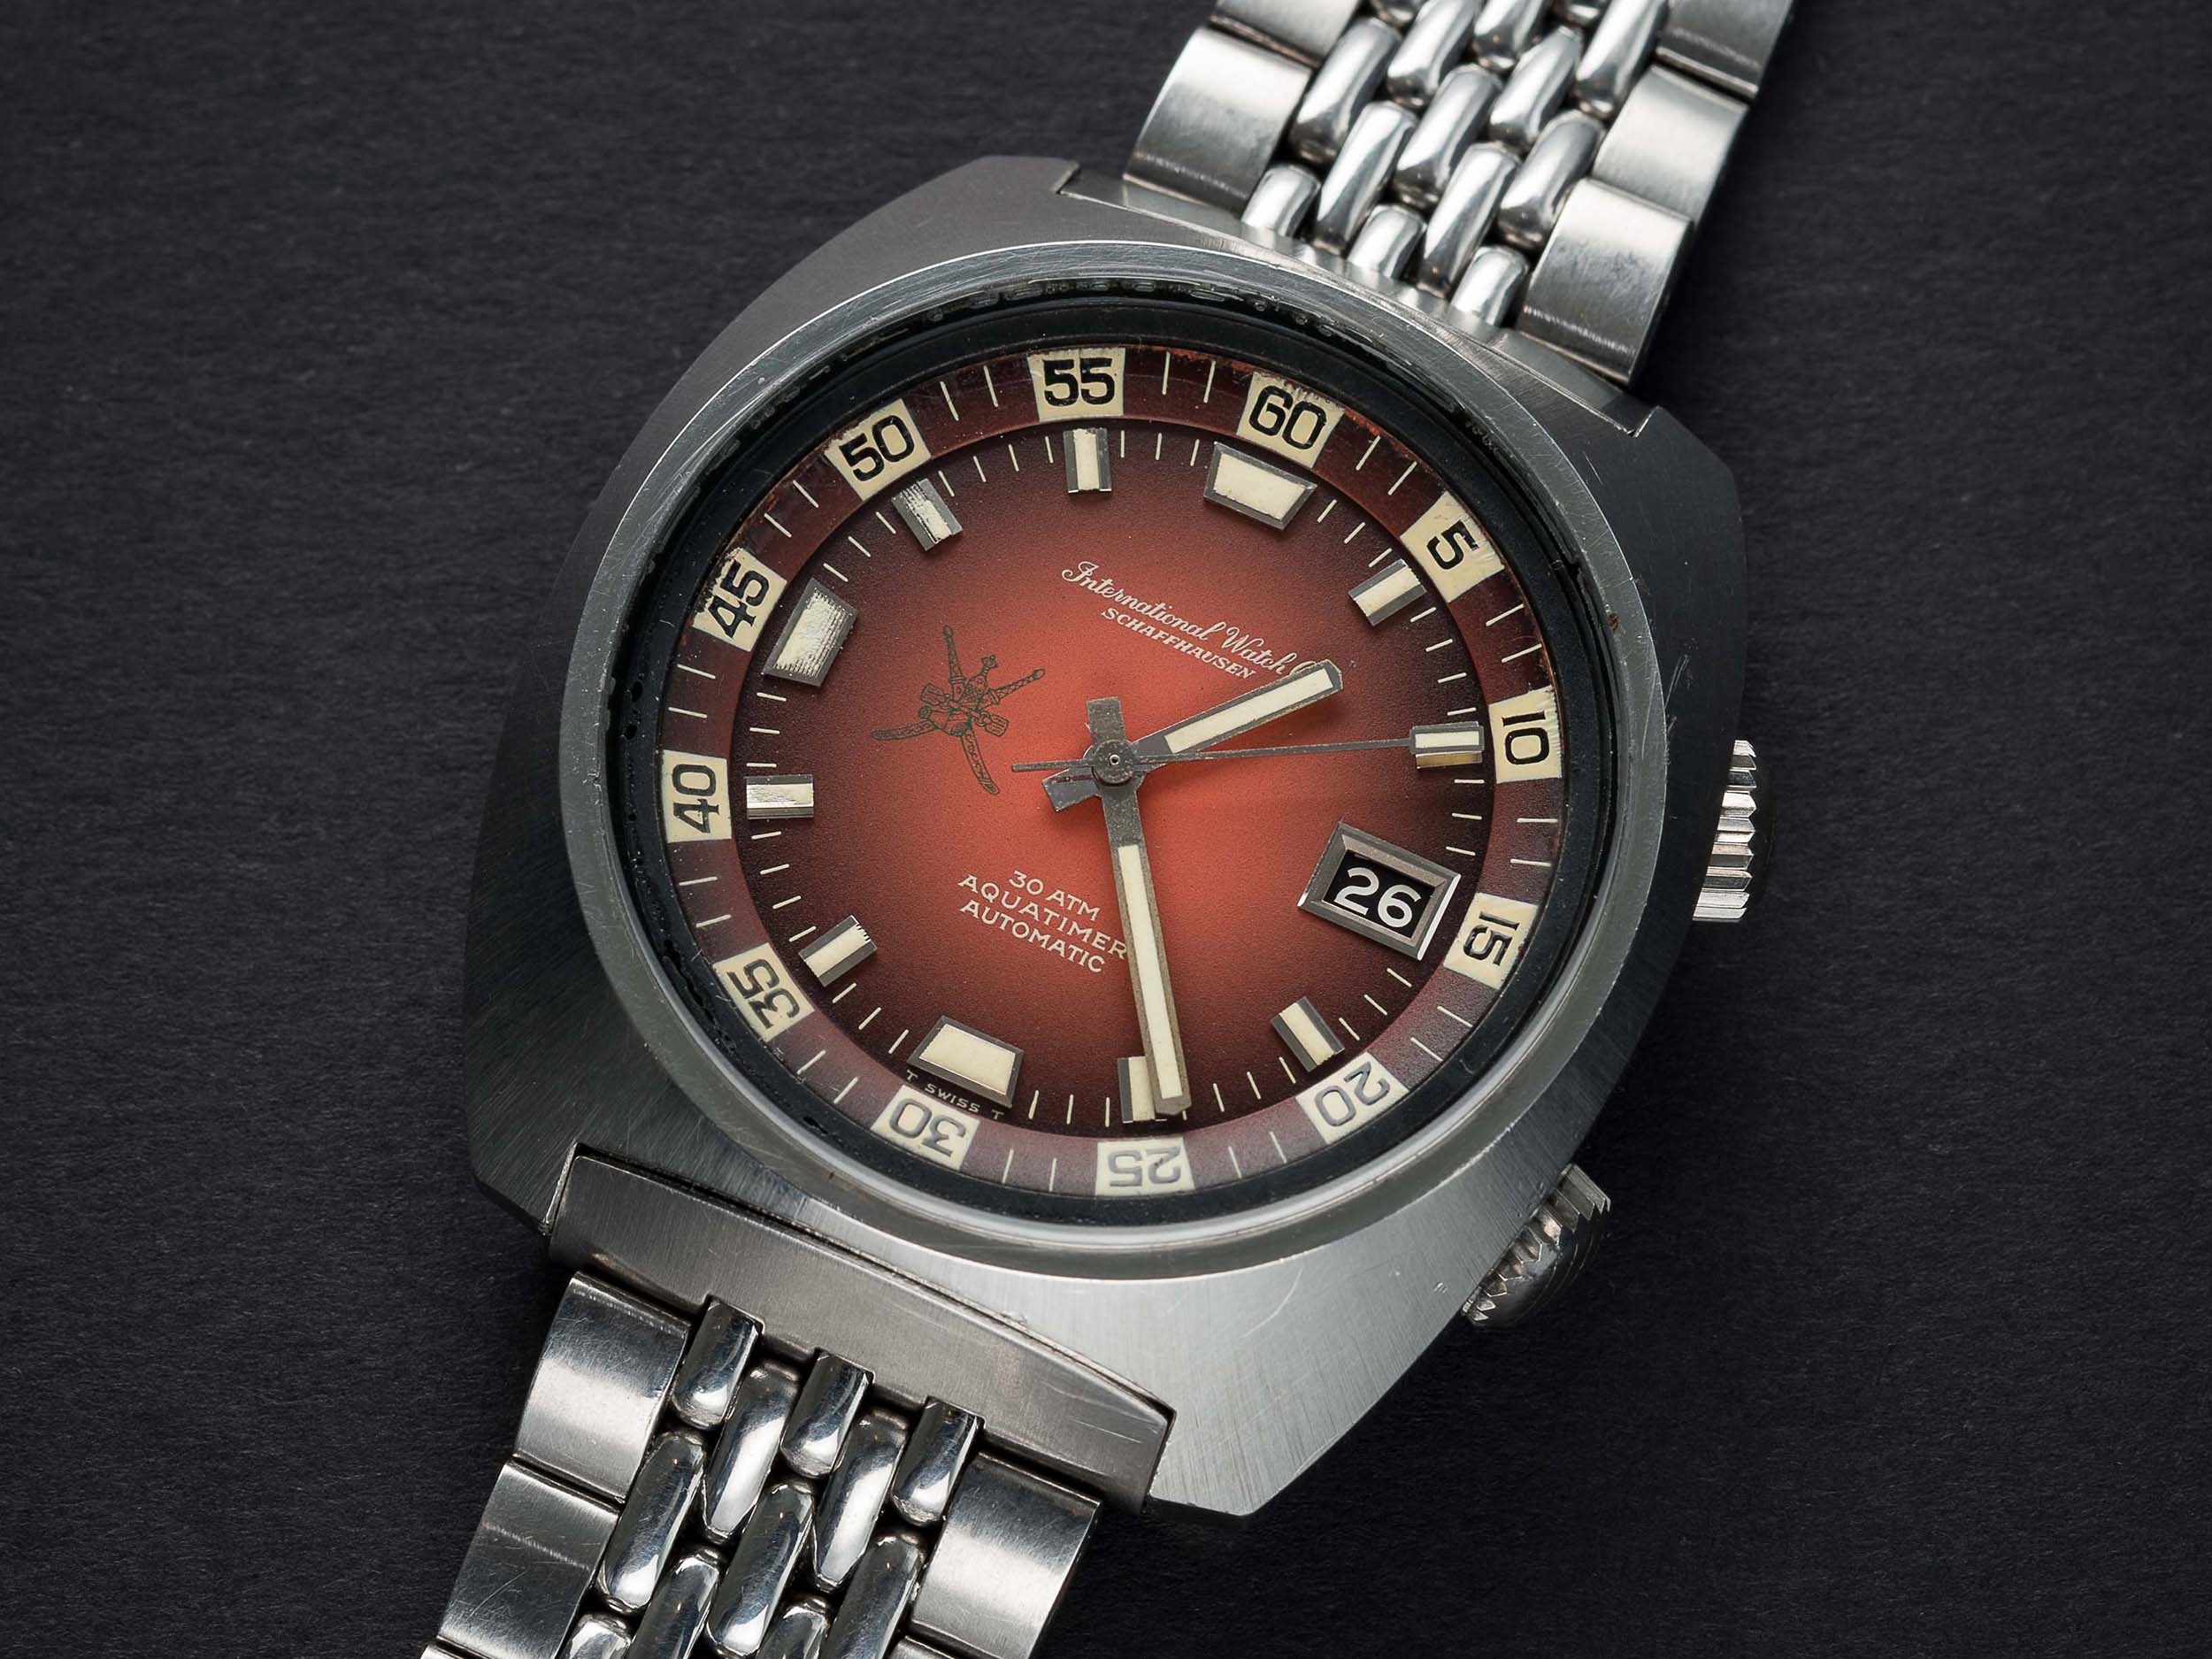 A VERY RARE GENTLEMAN'S STAINLESS STEEL IWC AQUATIMER 30ATM AUTOMATIC DIVERS BRACELET WATCH CIRCA